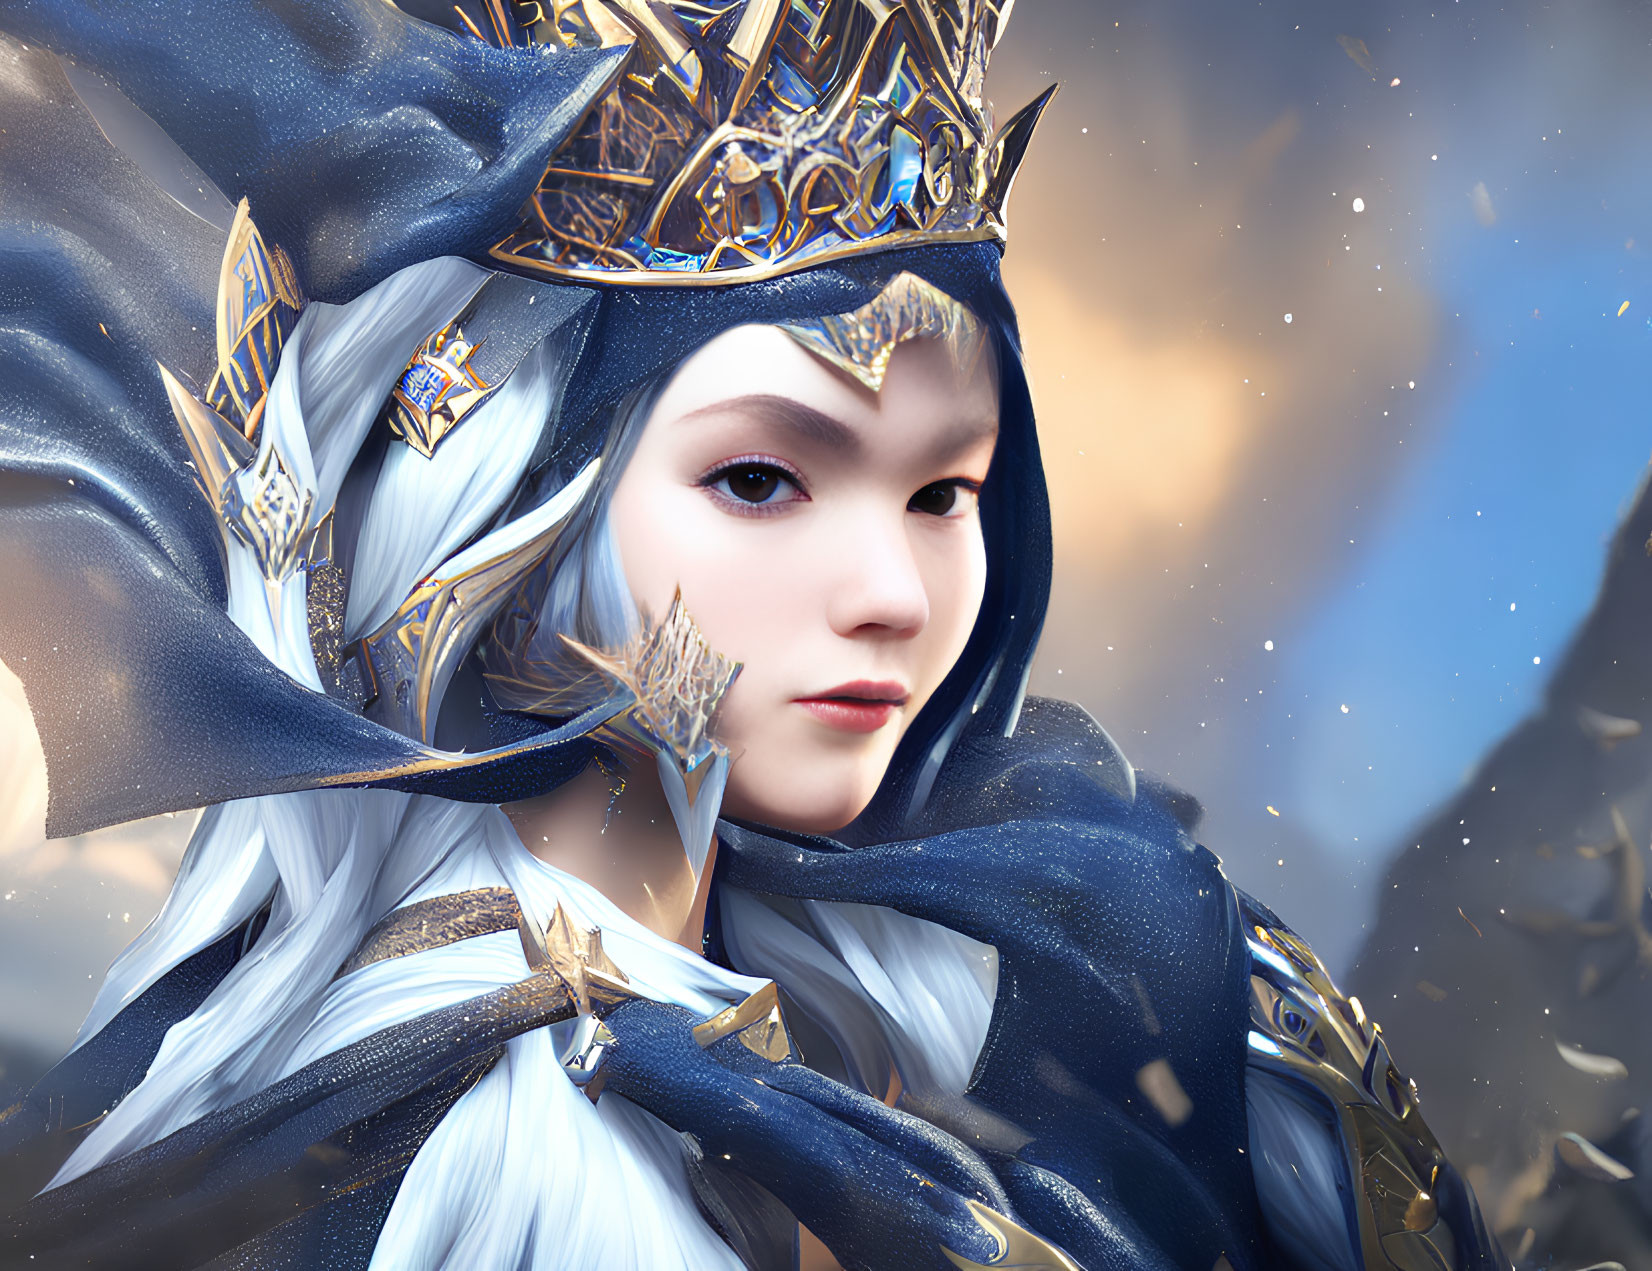 Regal female character with golden crown and blue robes